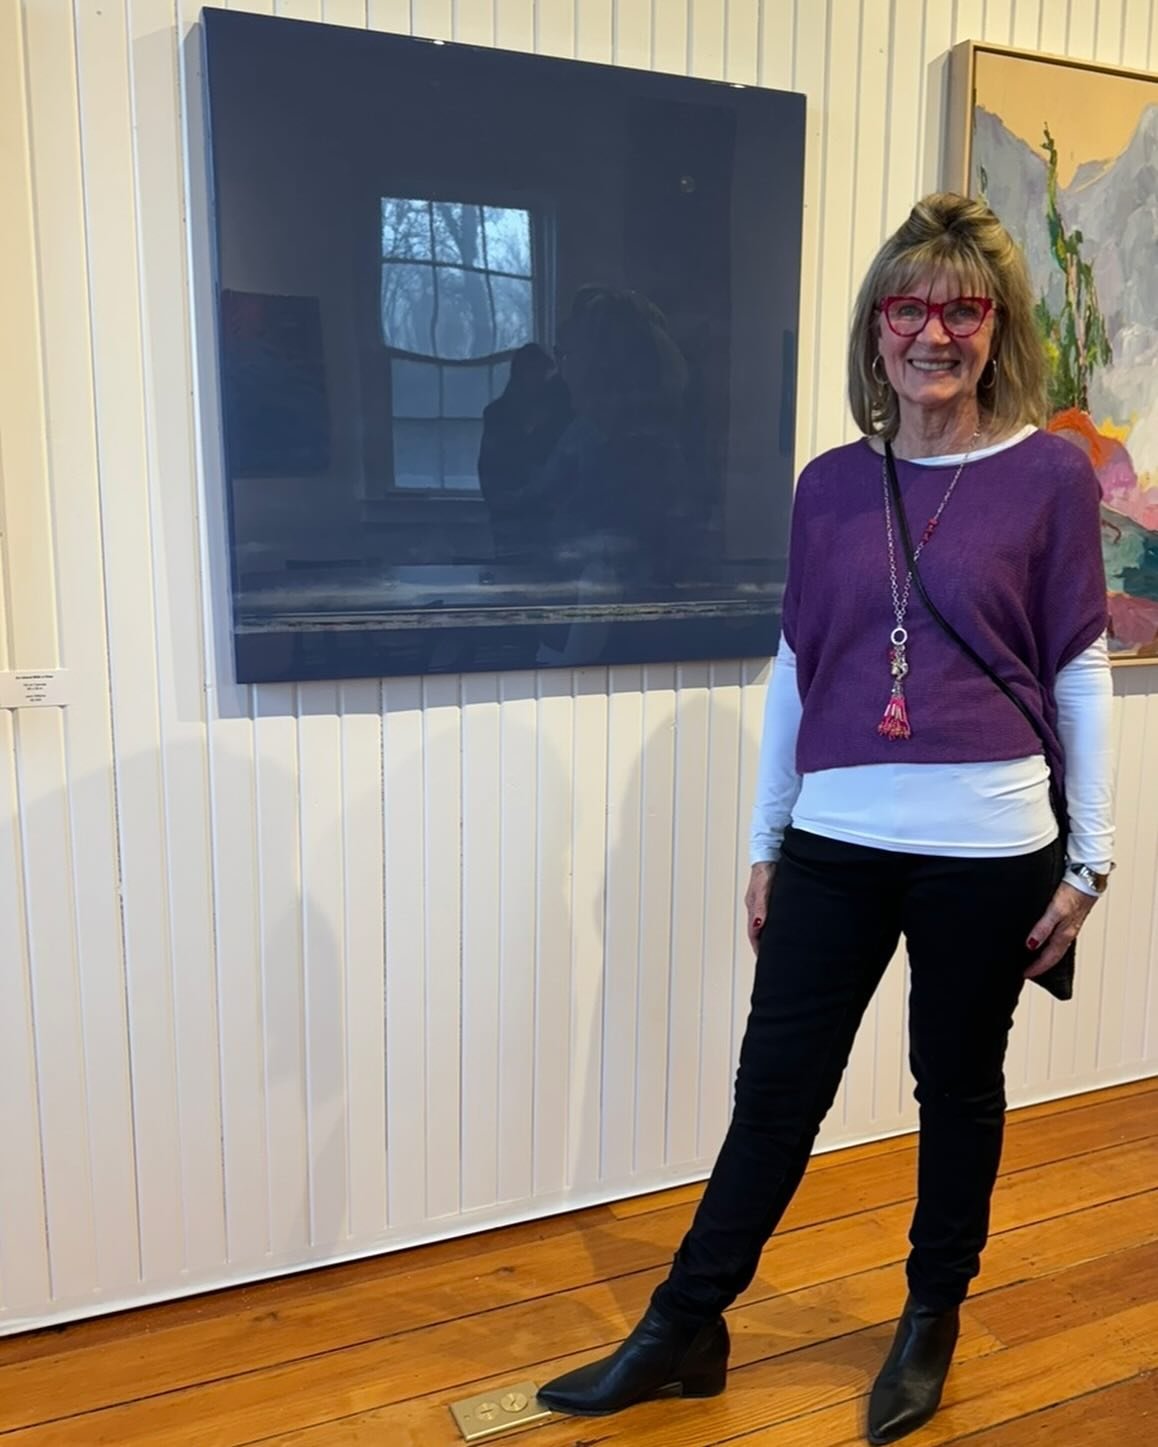 &ldquo;Artist in Residence &ldquo; stop by to join me tomorrow Sunday May 5th from 2-4pm. Come and see &ldquo;INSIDE OUT&rdquo; and all its wonderful colour at Nottawa General. Sign my guest book to join my mailing list for a chance to win a 6&rdquo;